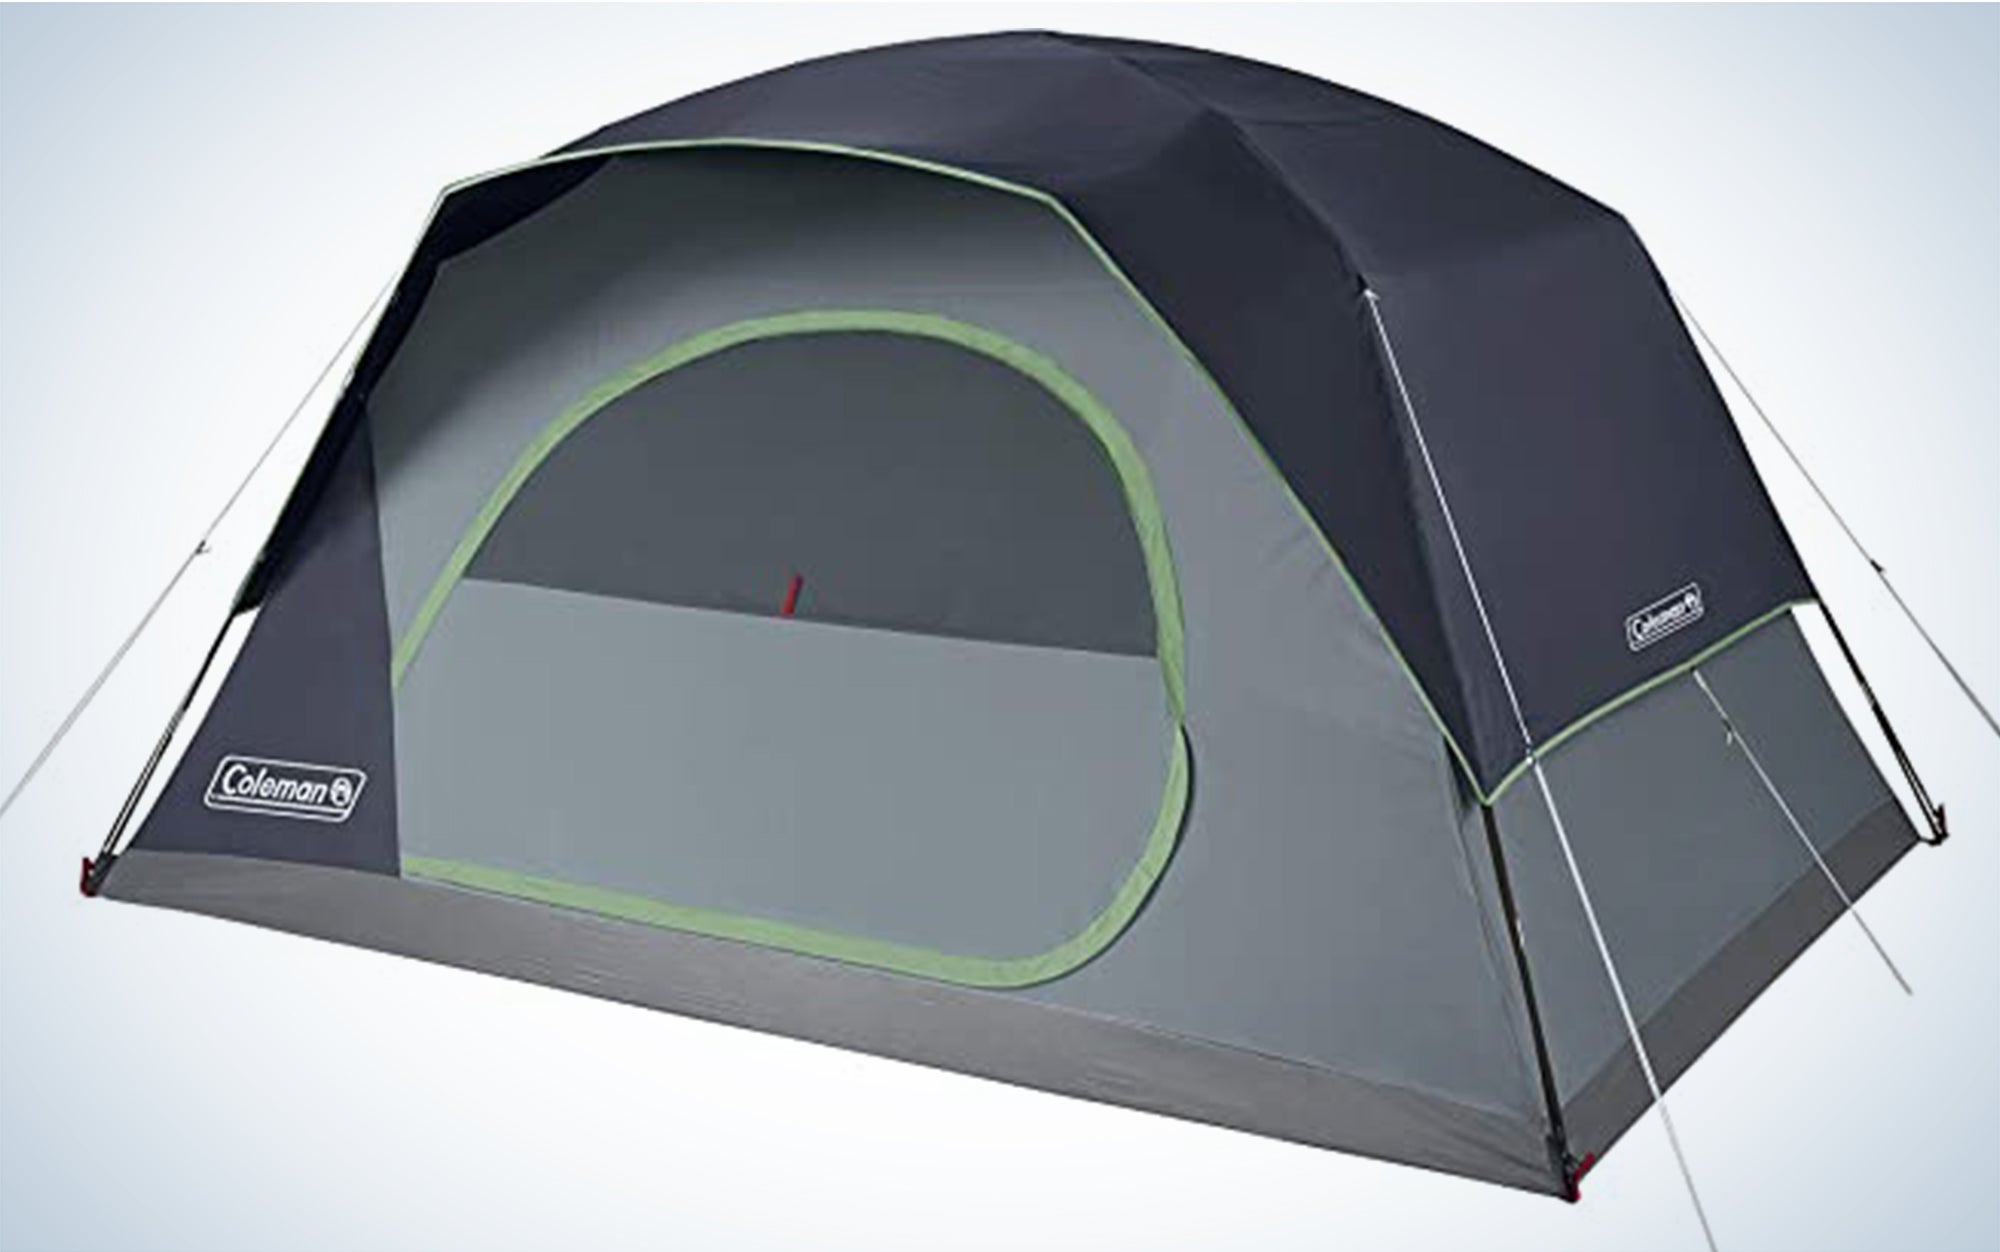 The Coleman SkydomeÂ is one of the best camping tents.